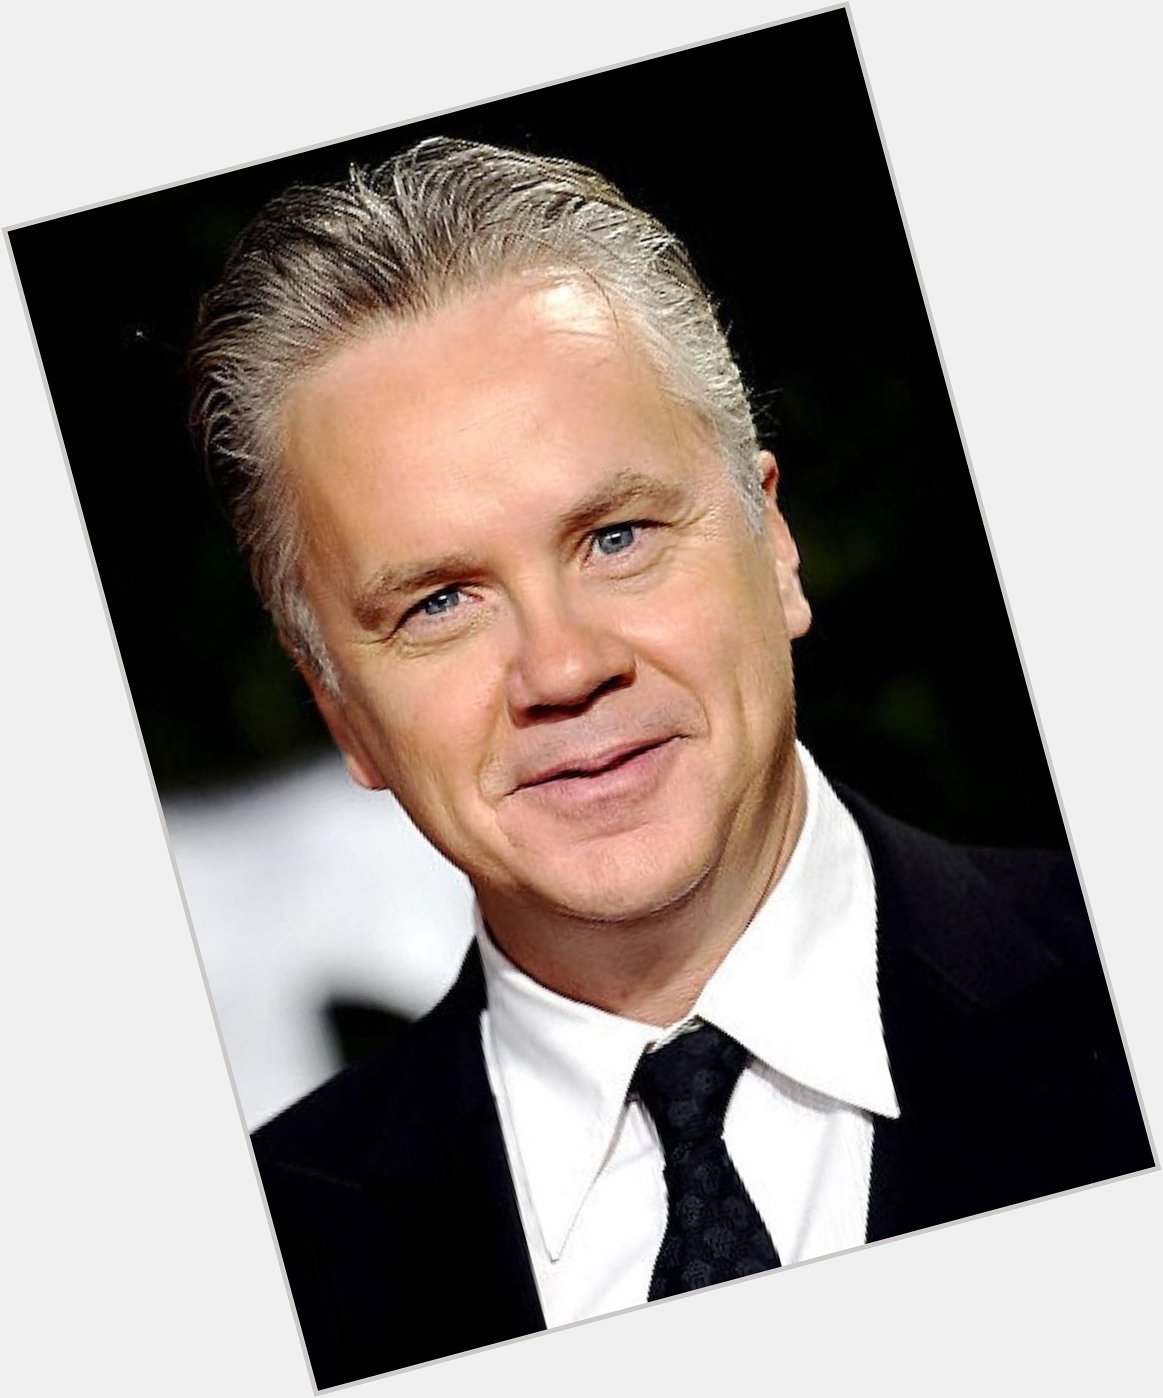 Happy Birthday to Tim Robbins who turns 62 today! 